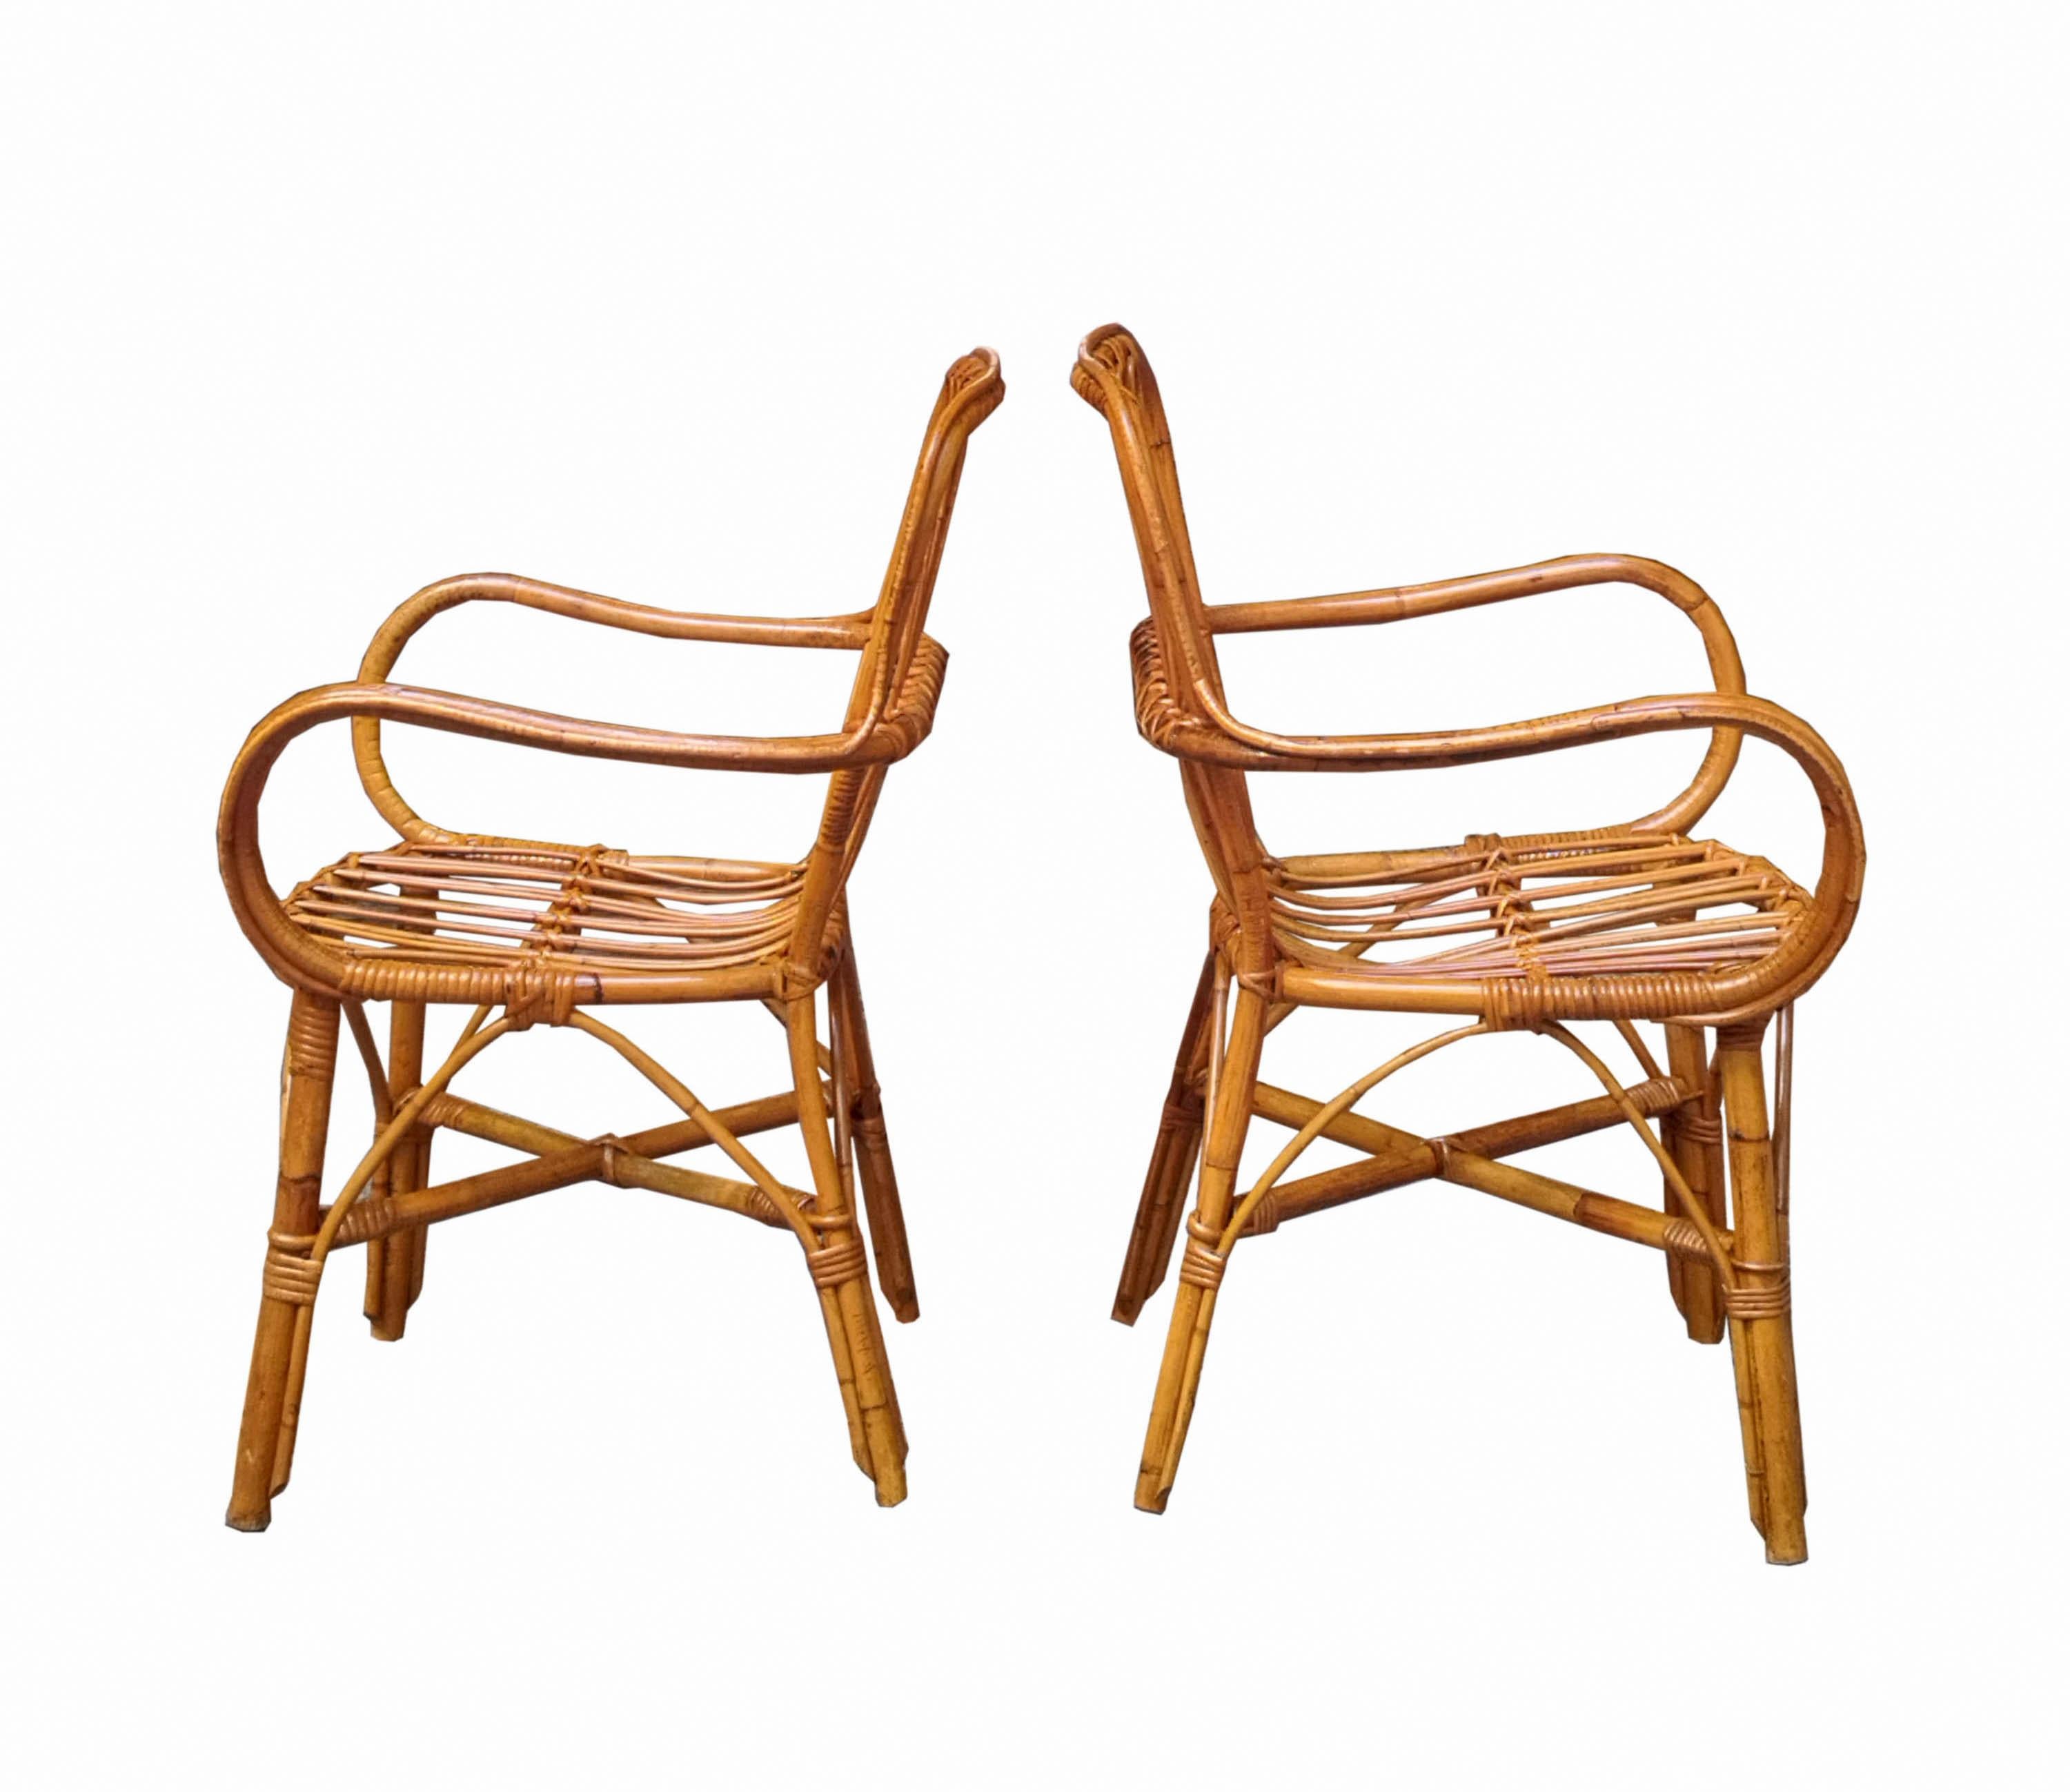 Rattan armchairs with curved armrests.
Good conditions.